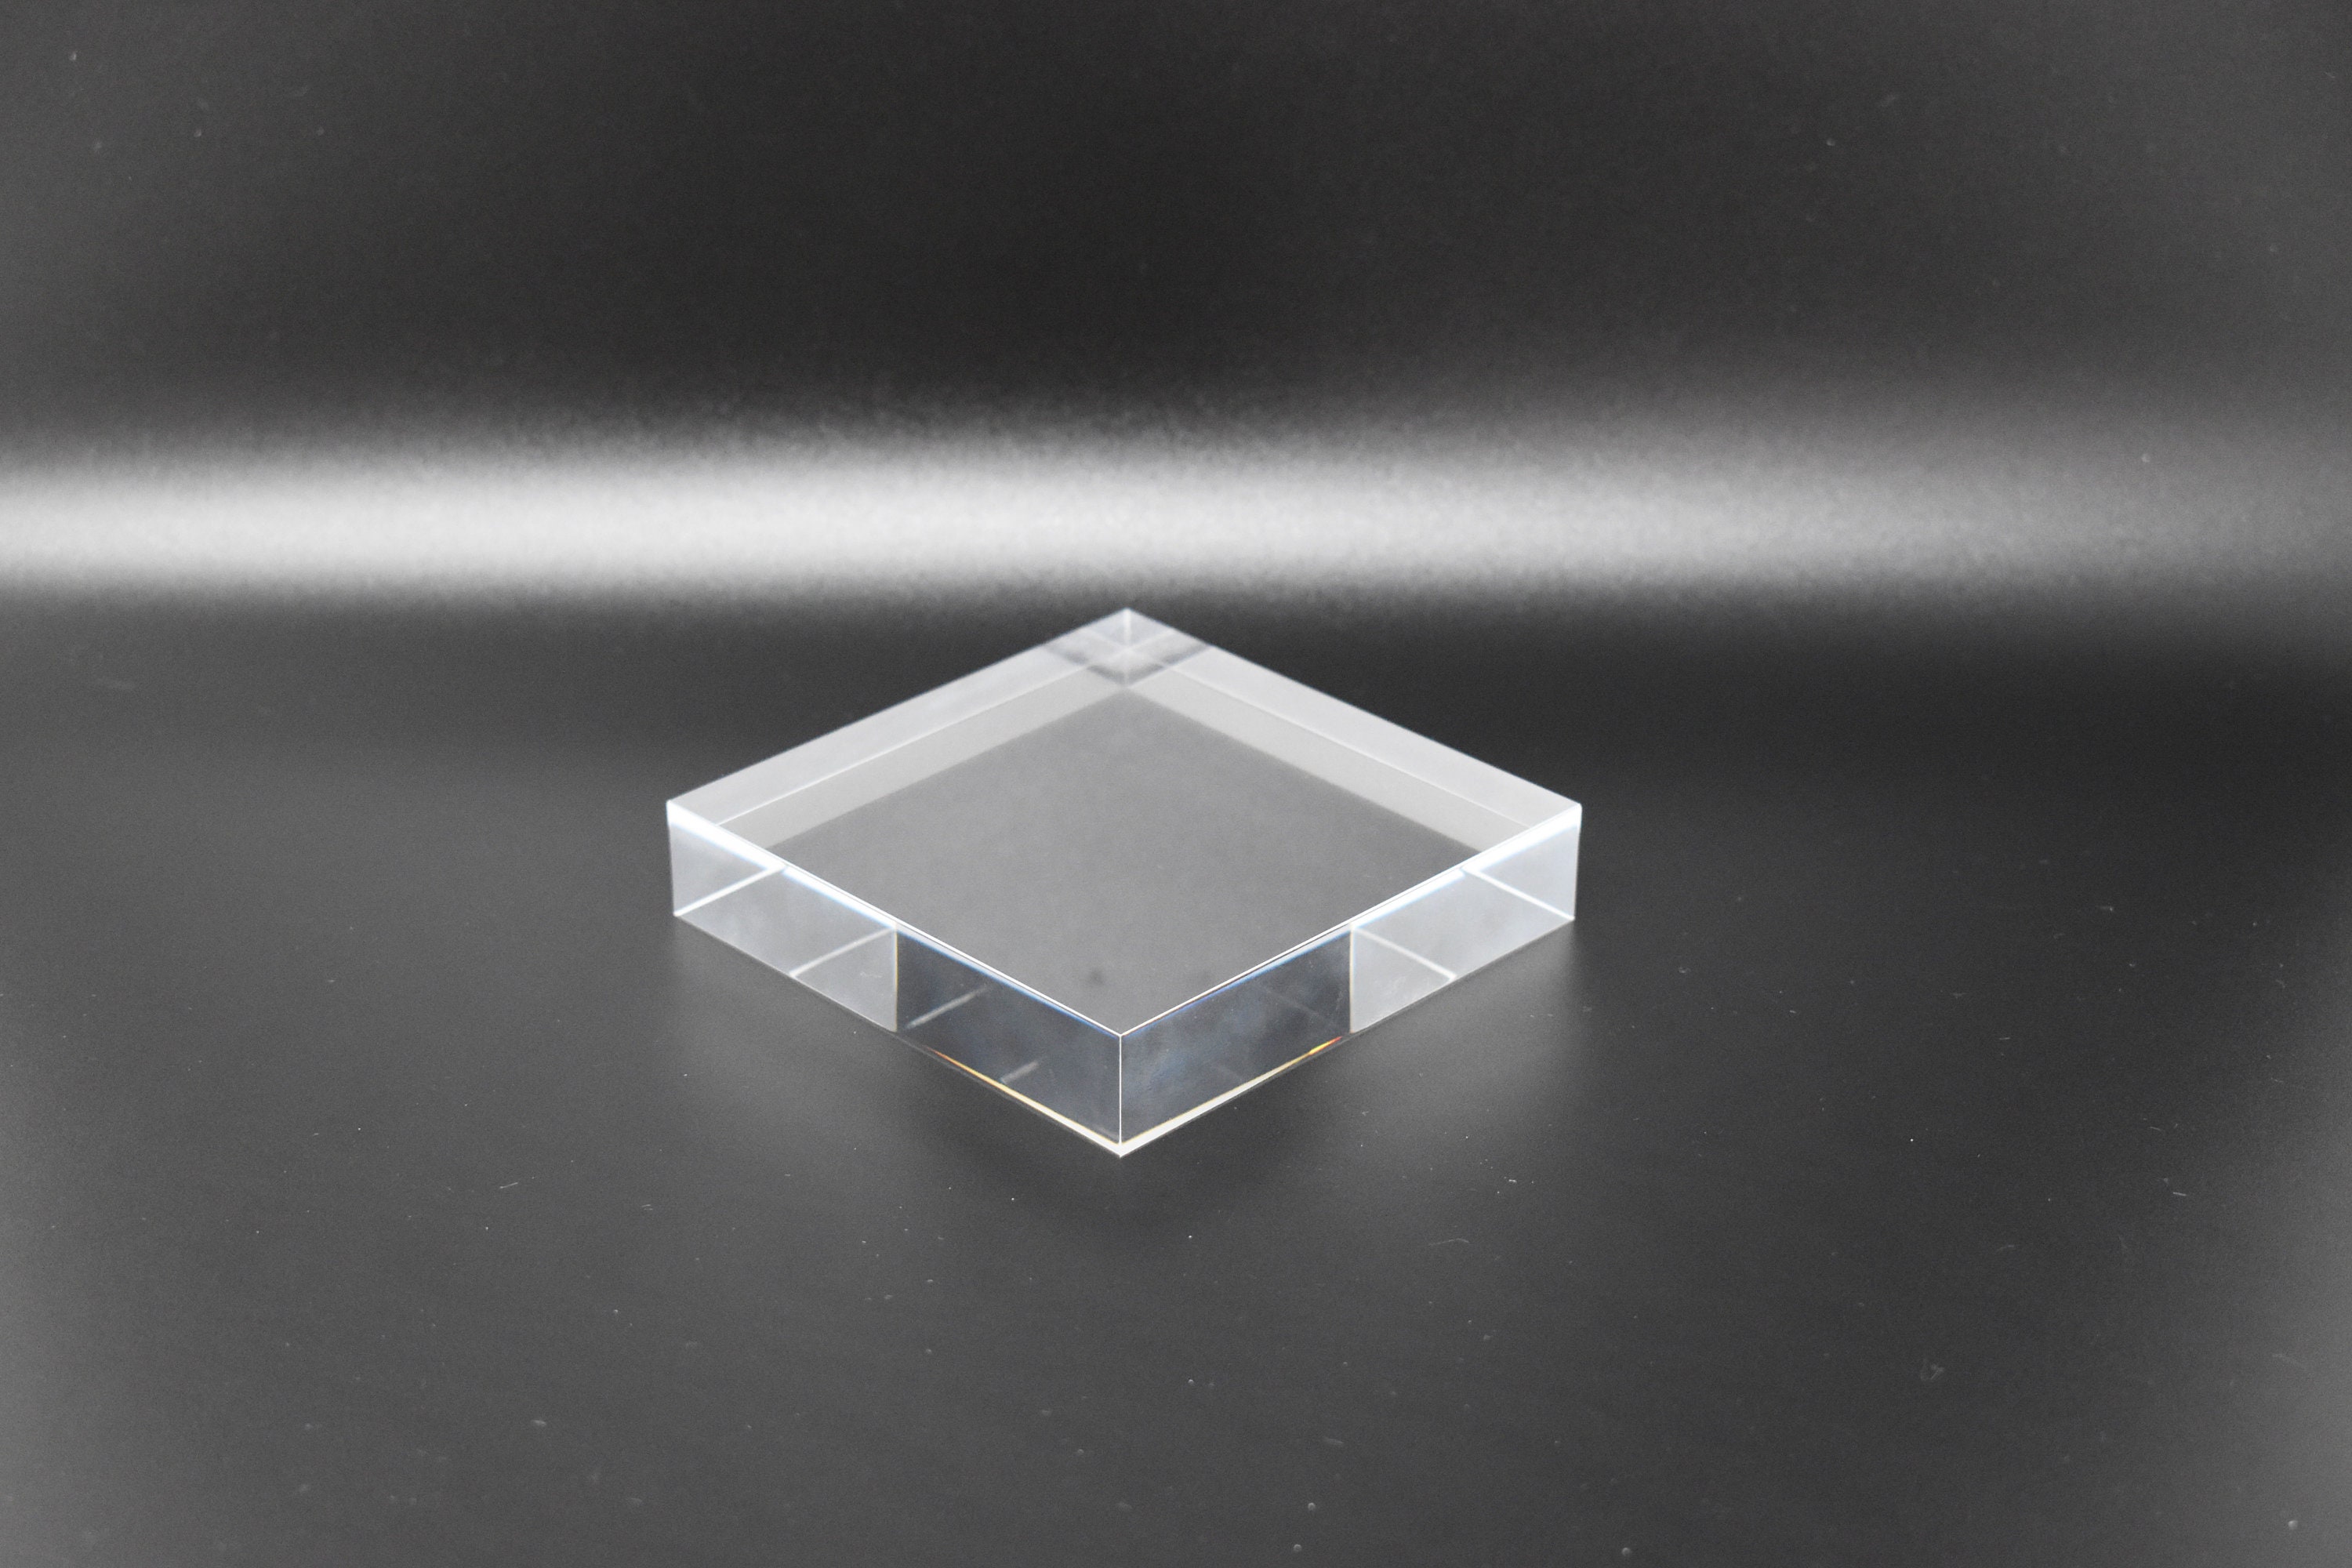 2 x 30mm Large Polished Clear Transparent Perspex Acrylic Cubes Blocks  (Pair)